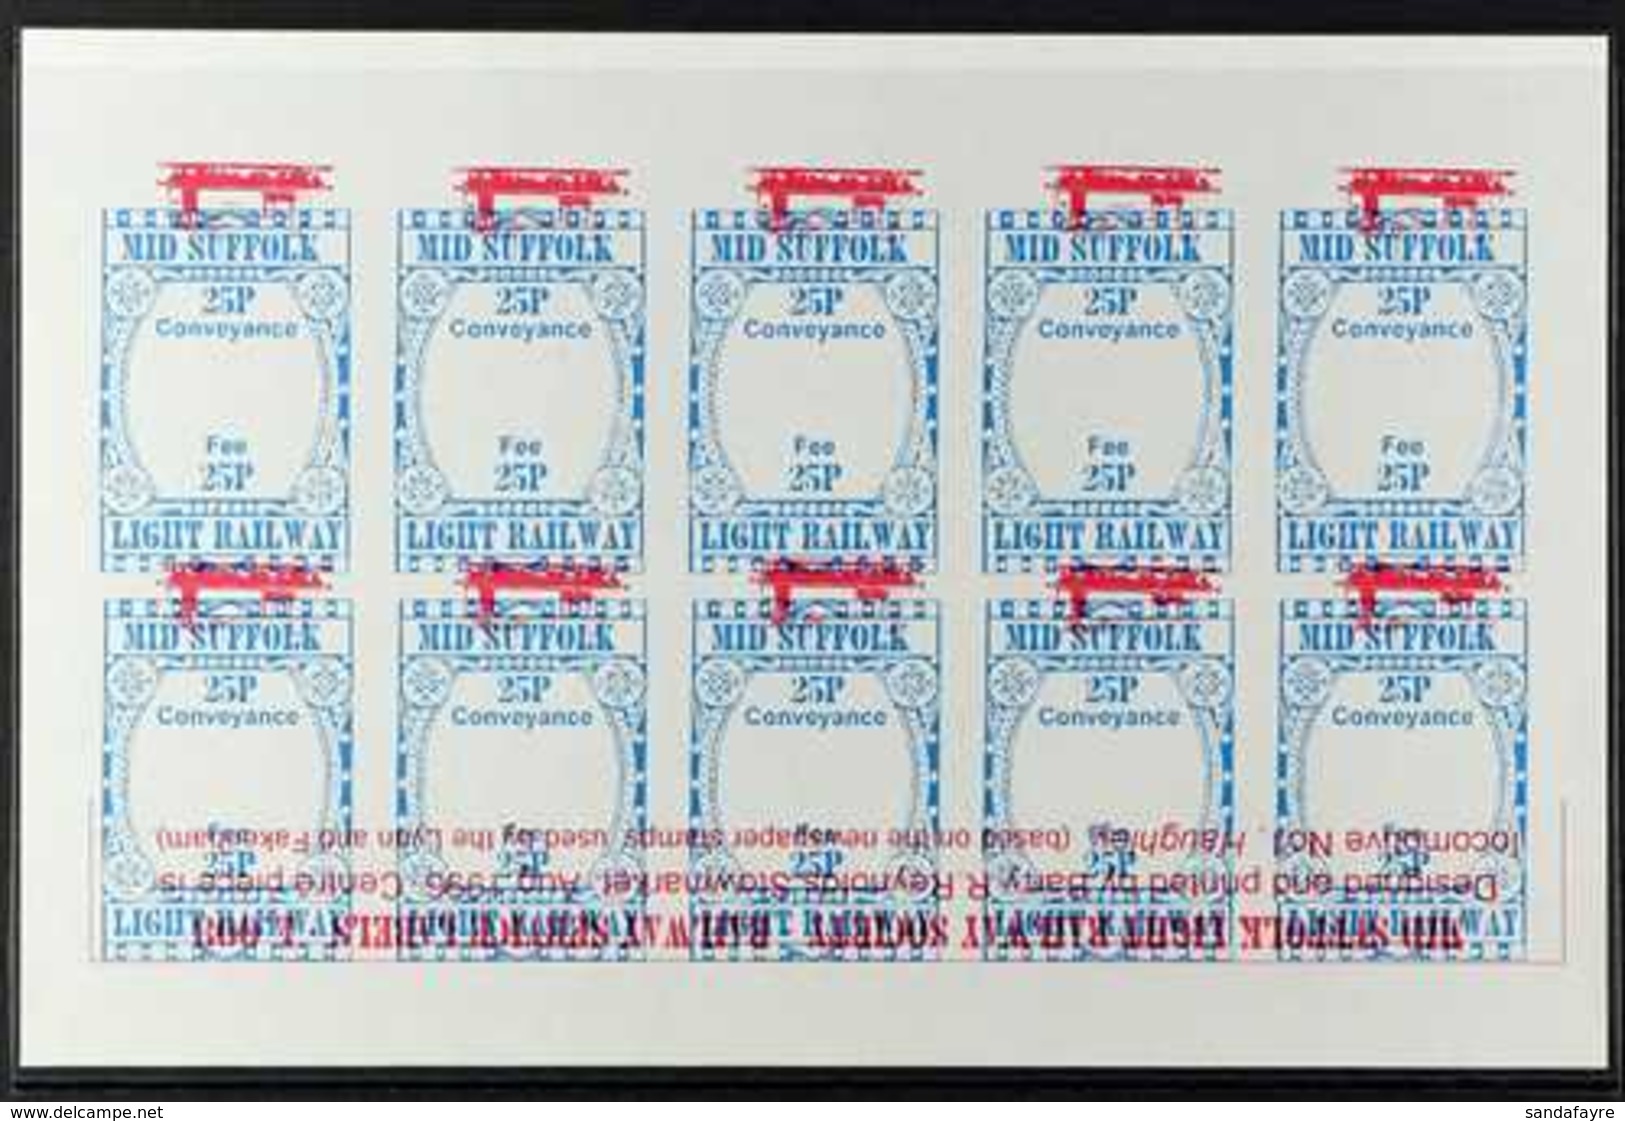 RAILWAYS MID SUFFOLK LIGHT RAILWAY 1996 25p Blue & Red Local Stamp Complete SHEETLET Of 10 With RED COLOUR INVERTED Vari - Unclassified